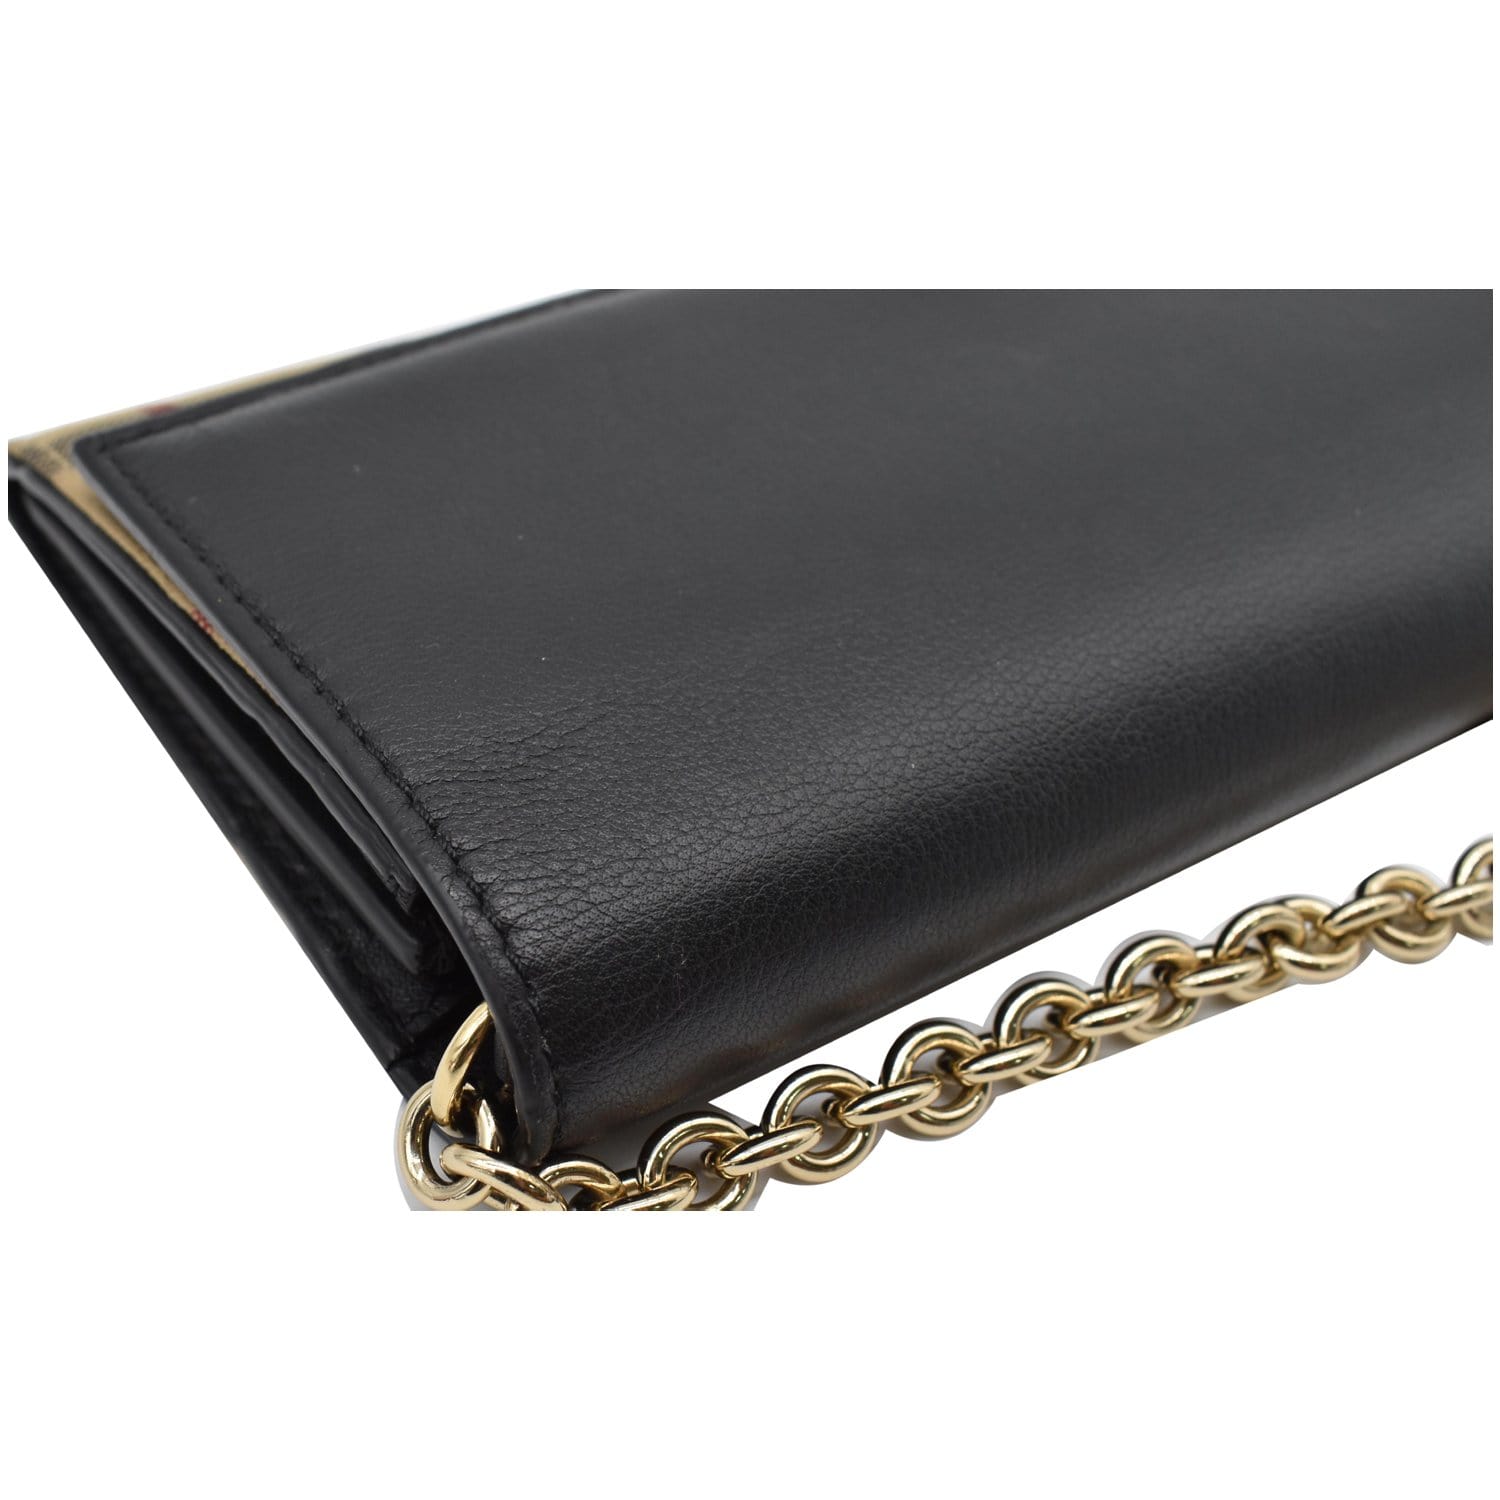 Burberry House Check Henley Chain Wallet